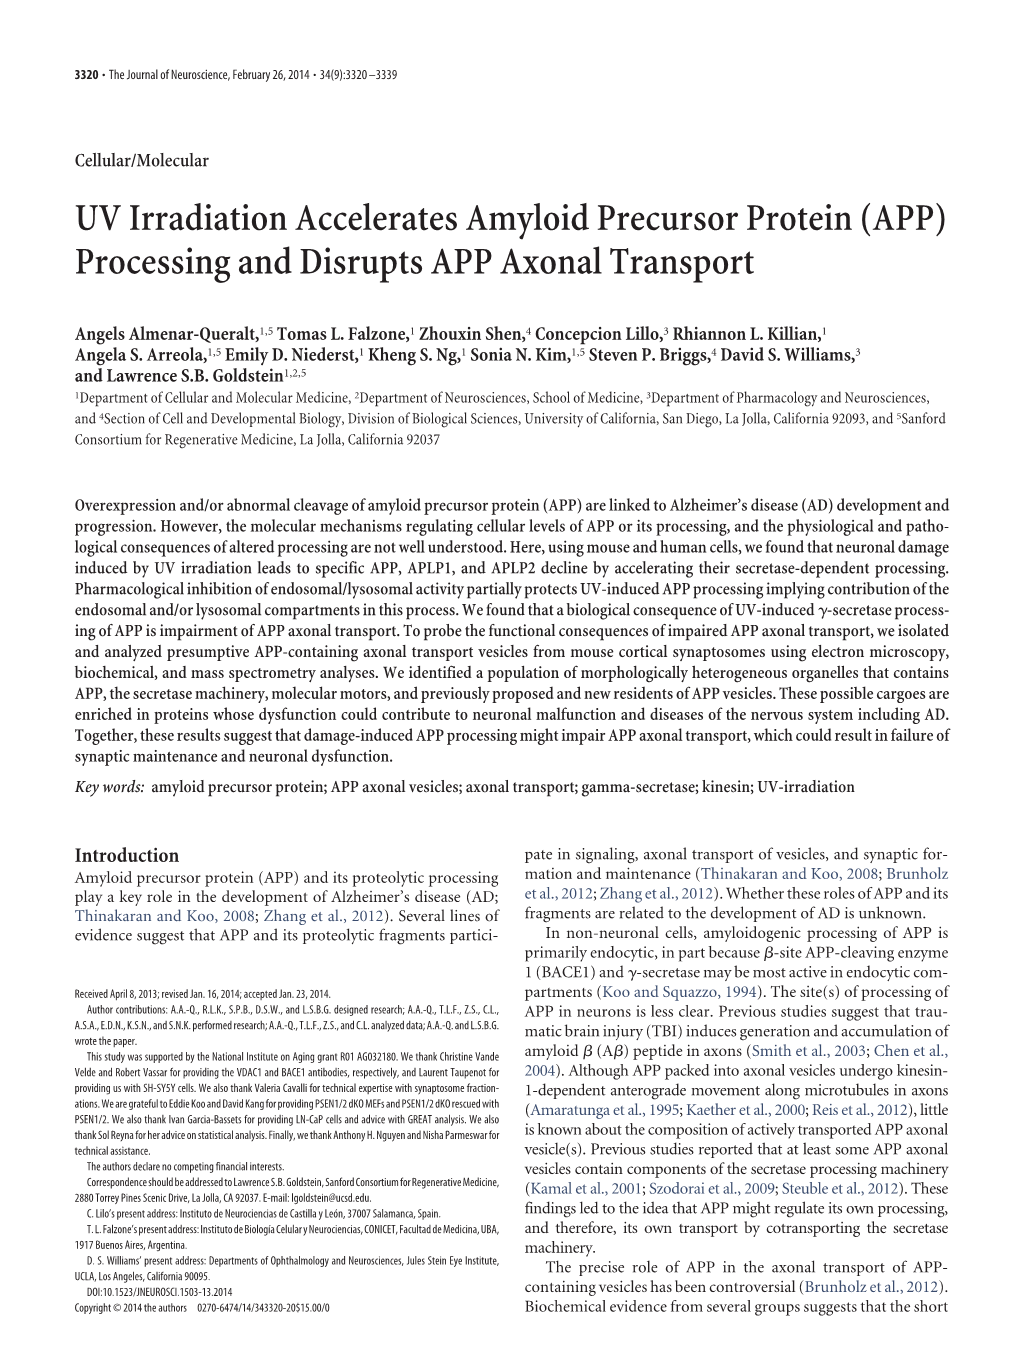 UV Irradiation Accelerates Amyloid Precursor Protein (APP) Processing and Disrupts APP Axonal Transport